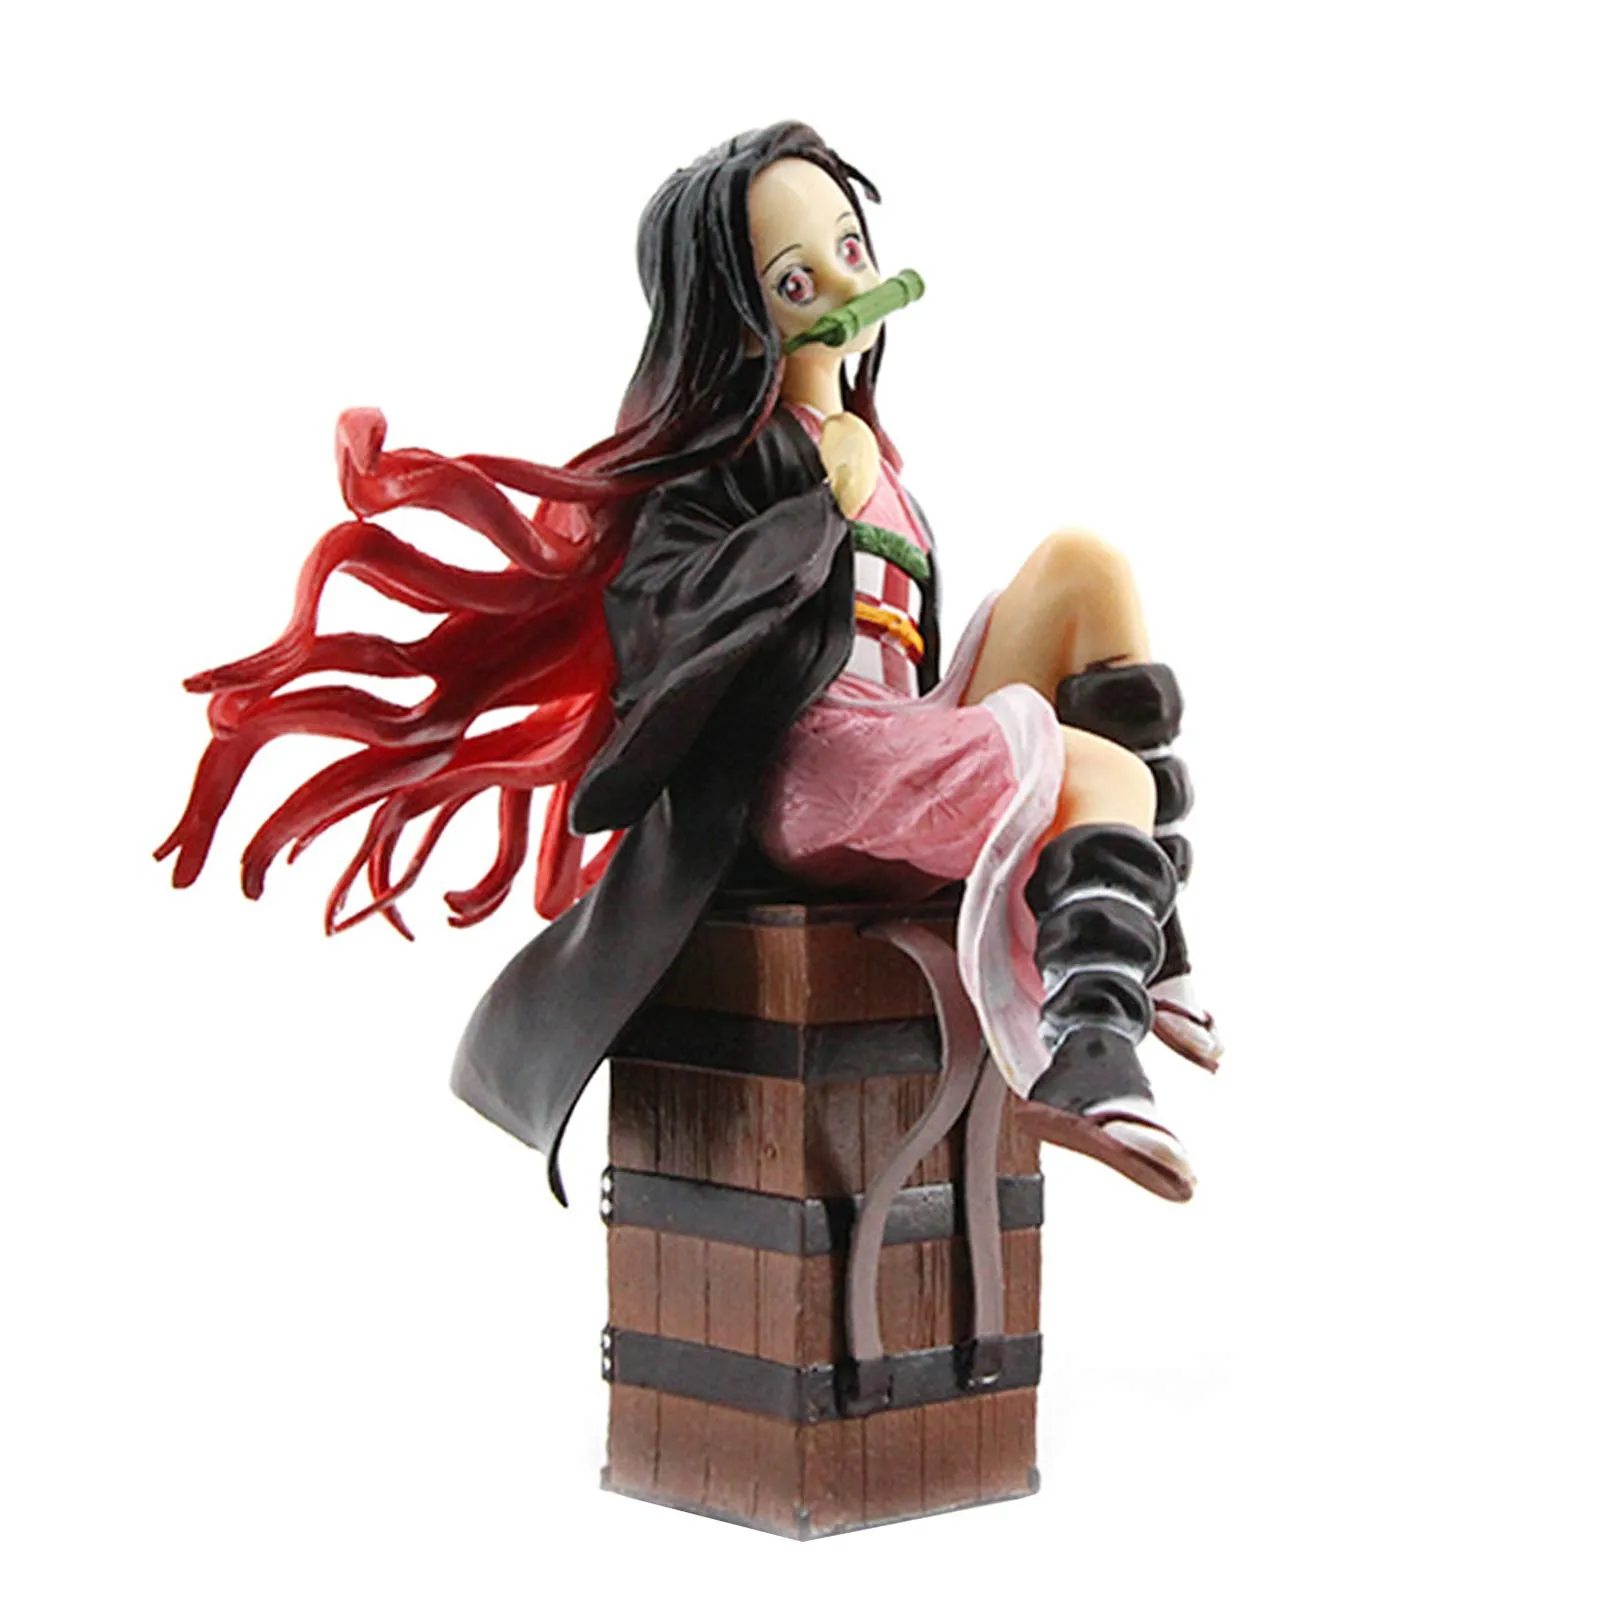 Demon Slayer Toy,15CM Cartoon Figure Statues PVC Action Figure Model Sitting Model Doll Decoration Gifts Figure Statue Anime Collection Figurine Doll Toys Theme Party Supplies